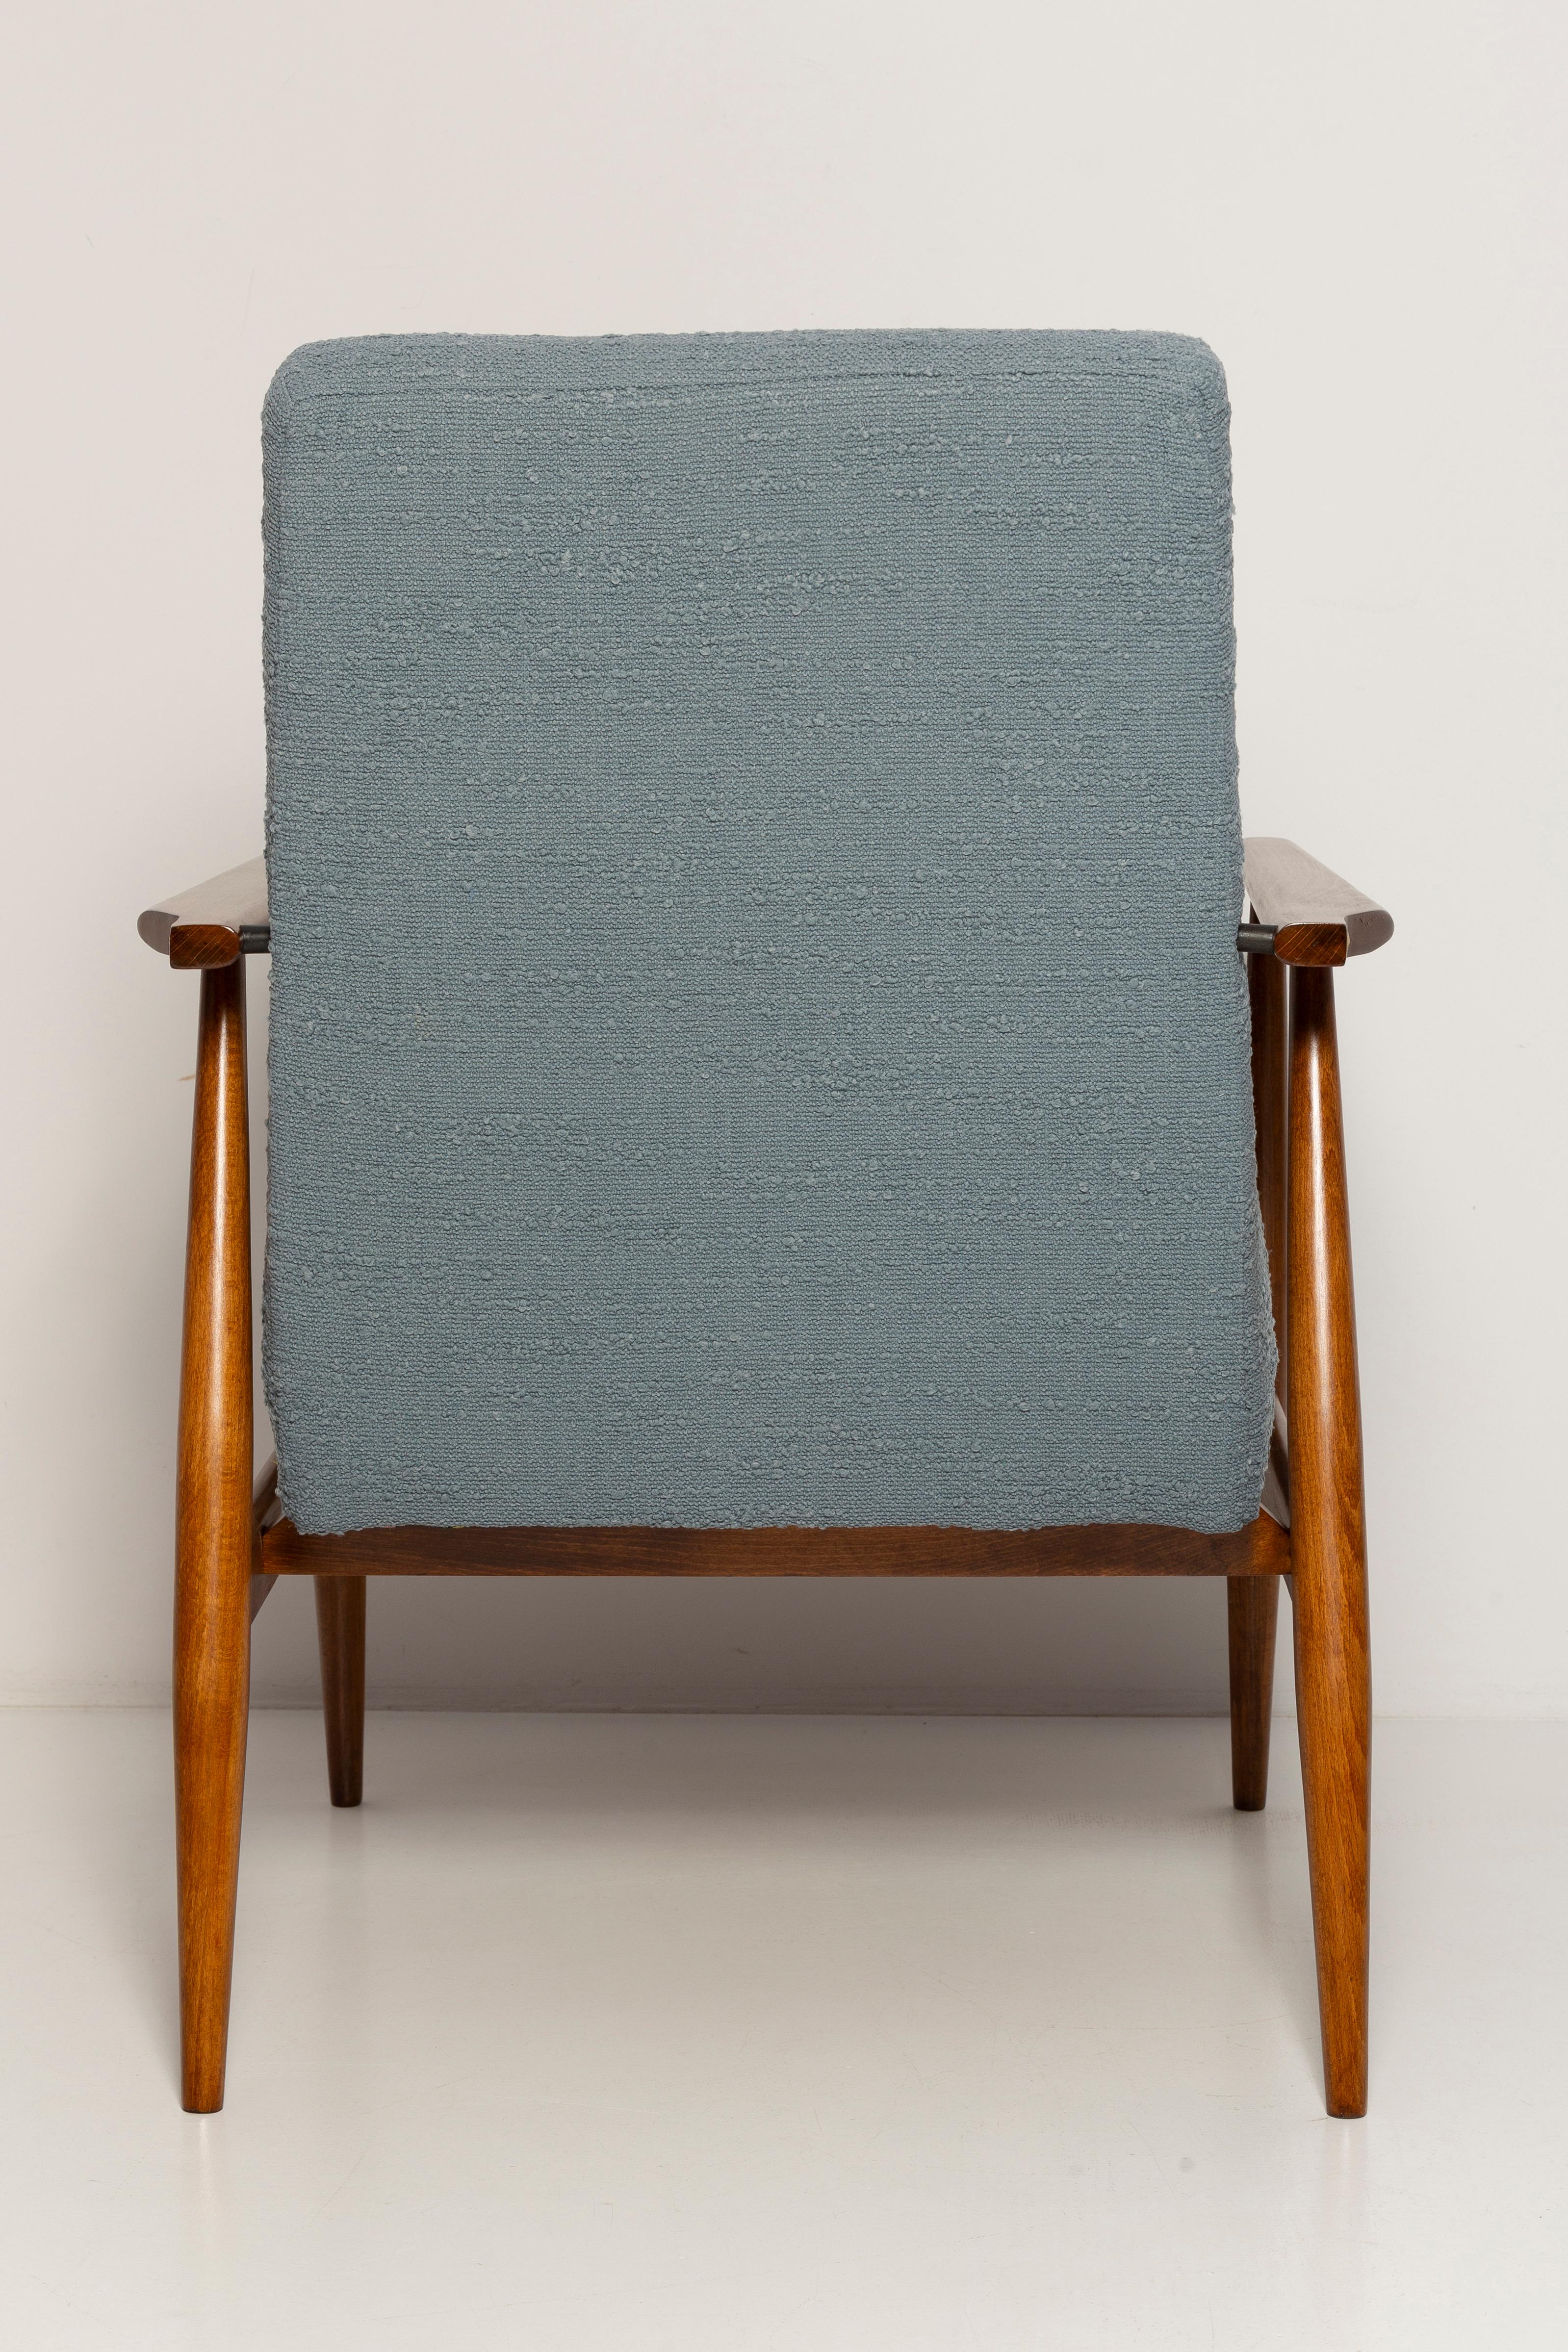 Set of Two Mid-Century Gray Blue Boucle Dante Armchairs, H. Lis, 1960s For Sale 3